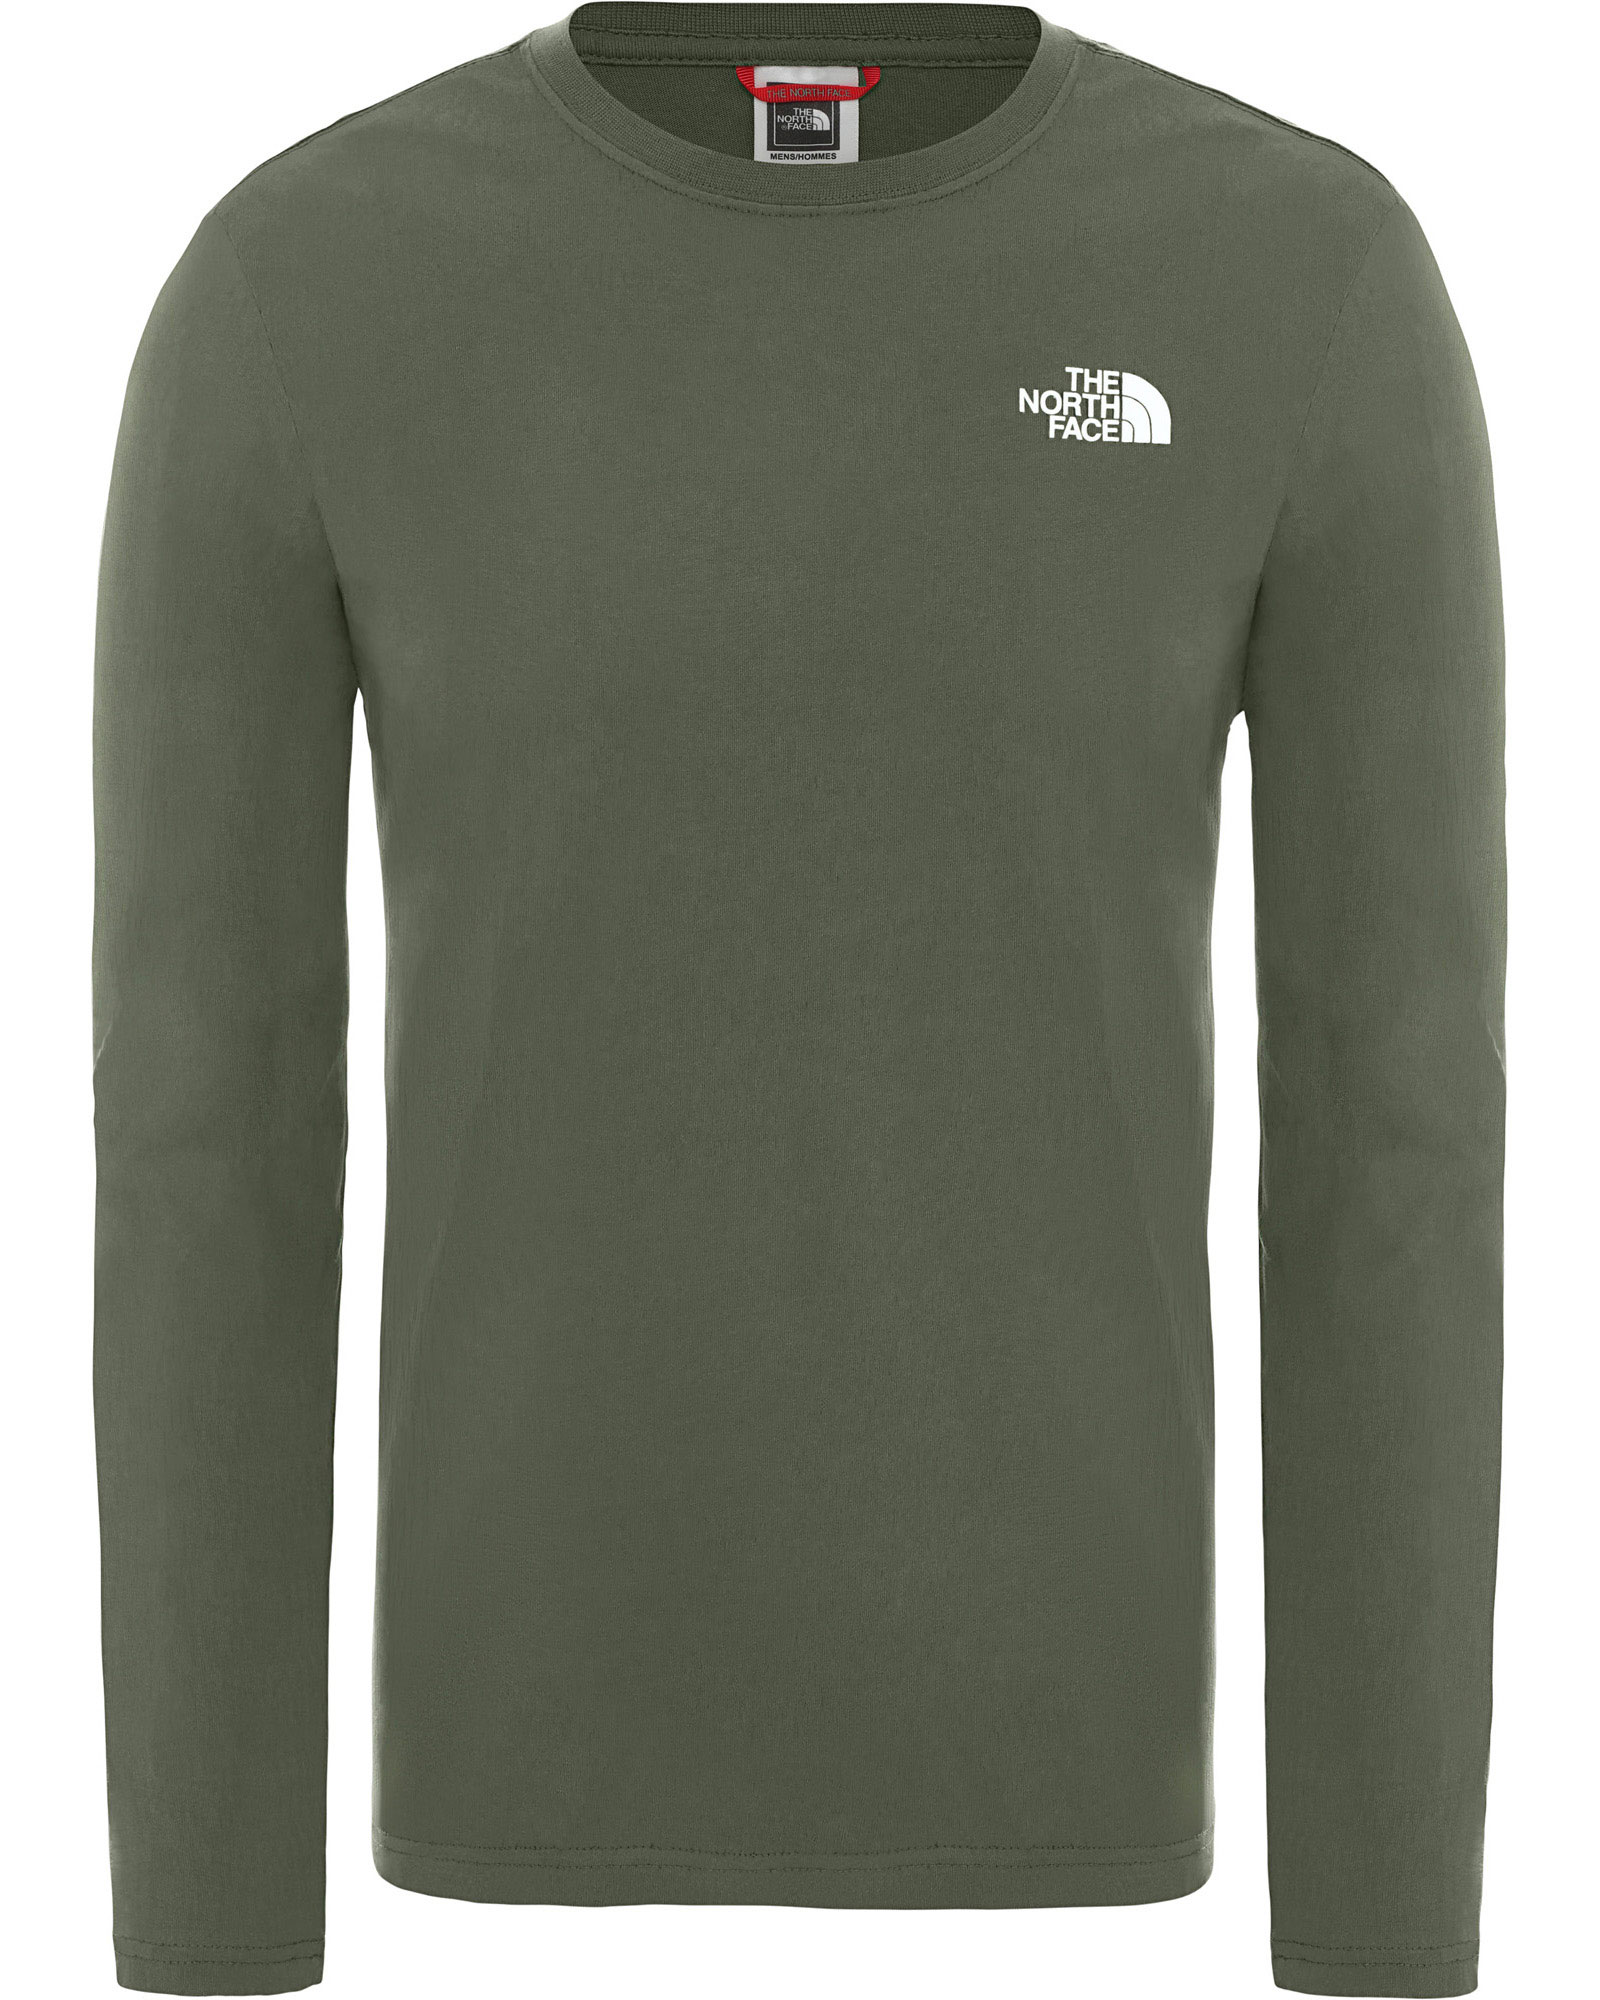 The North Face Red Box Men’s Long Sleeve T Shirt - Thyme S